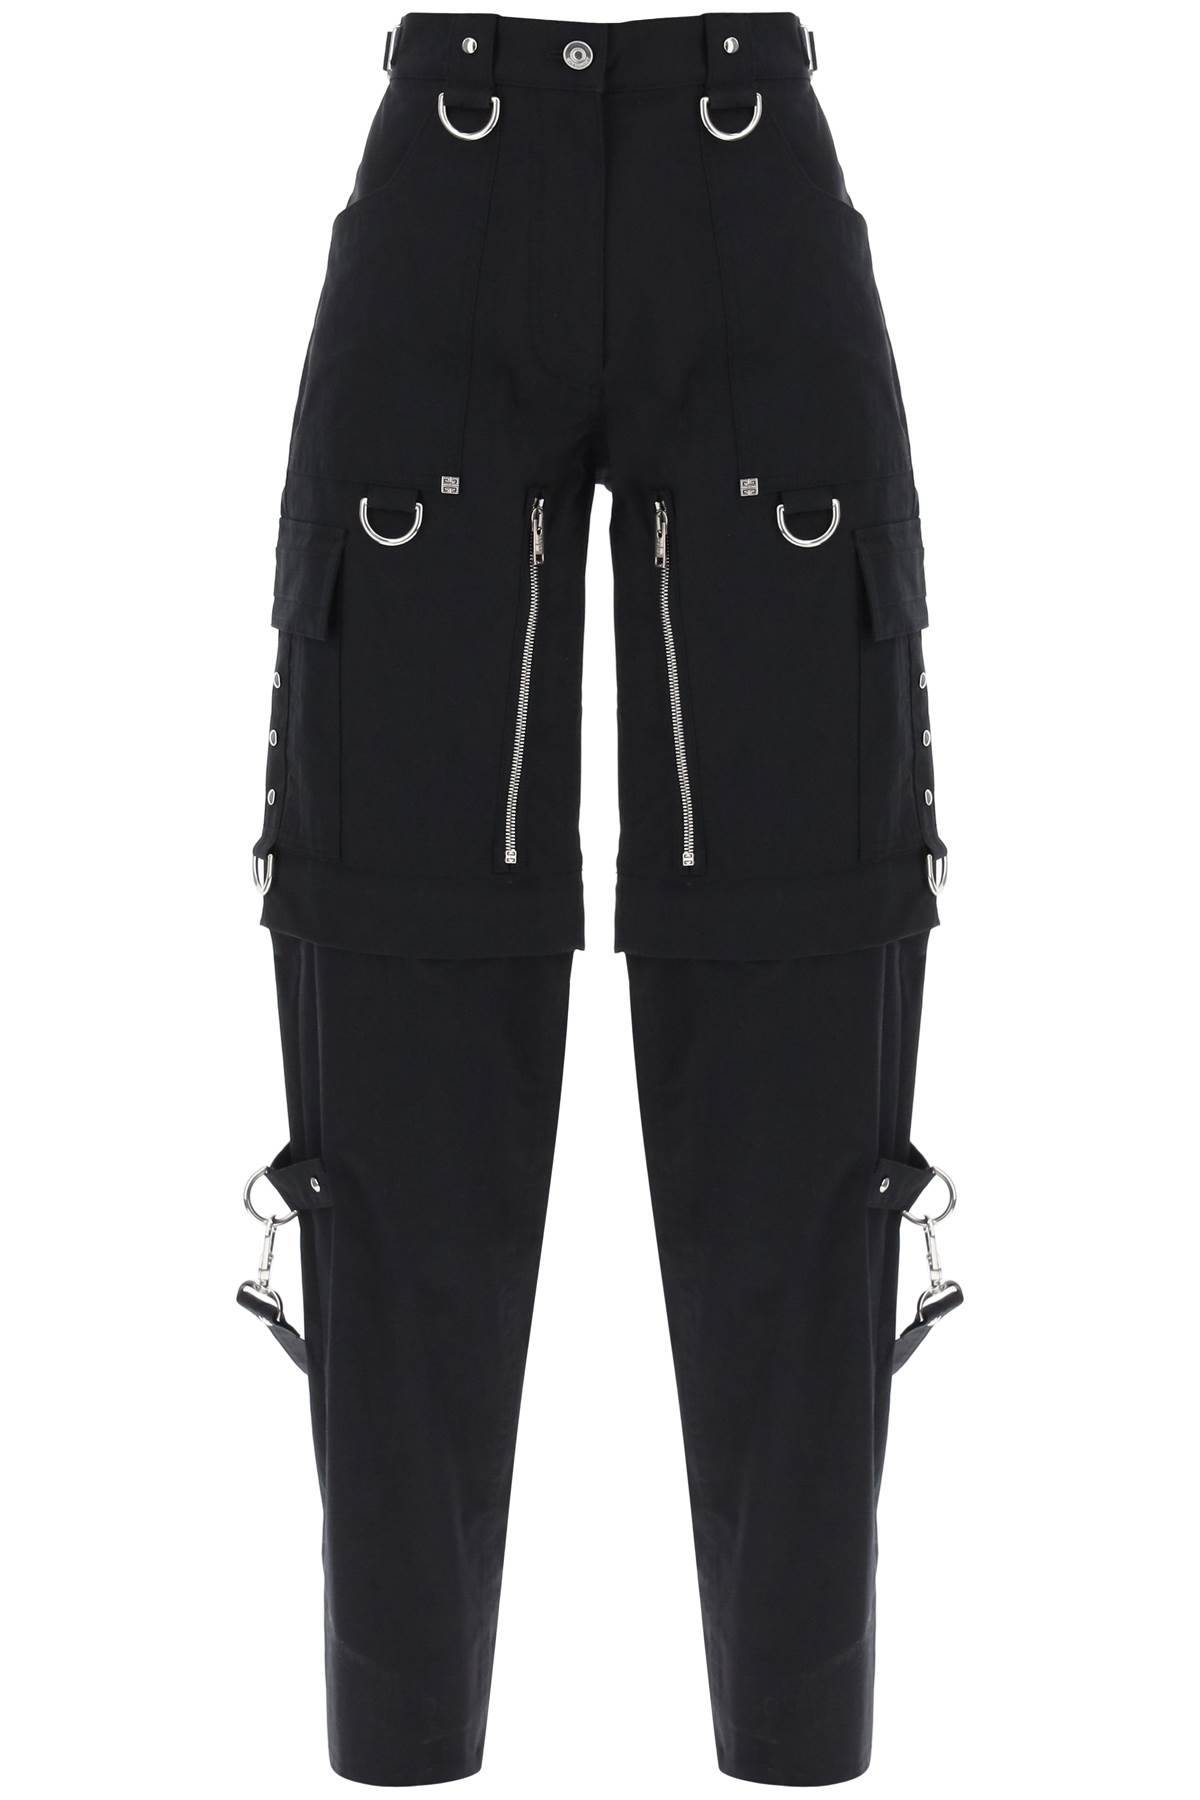 Givenchy Convertible Cargo Pants With Suspenders In Black